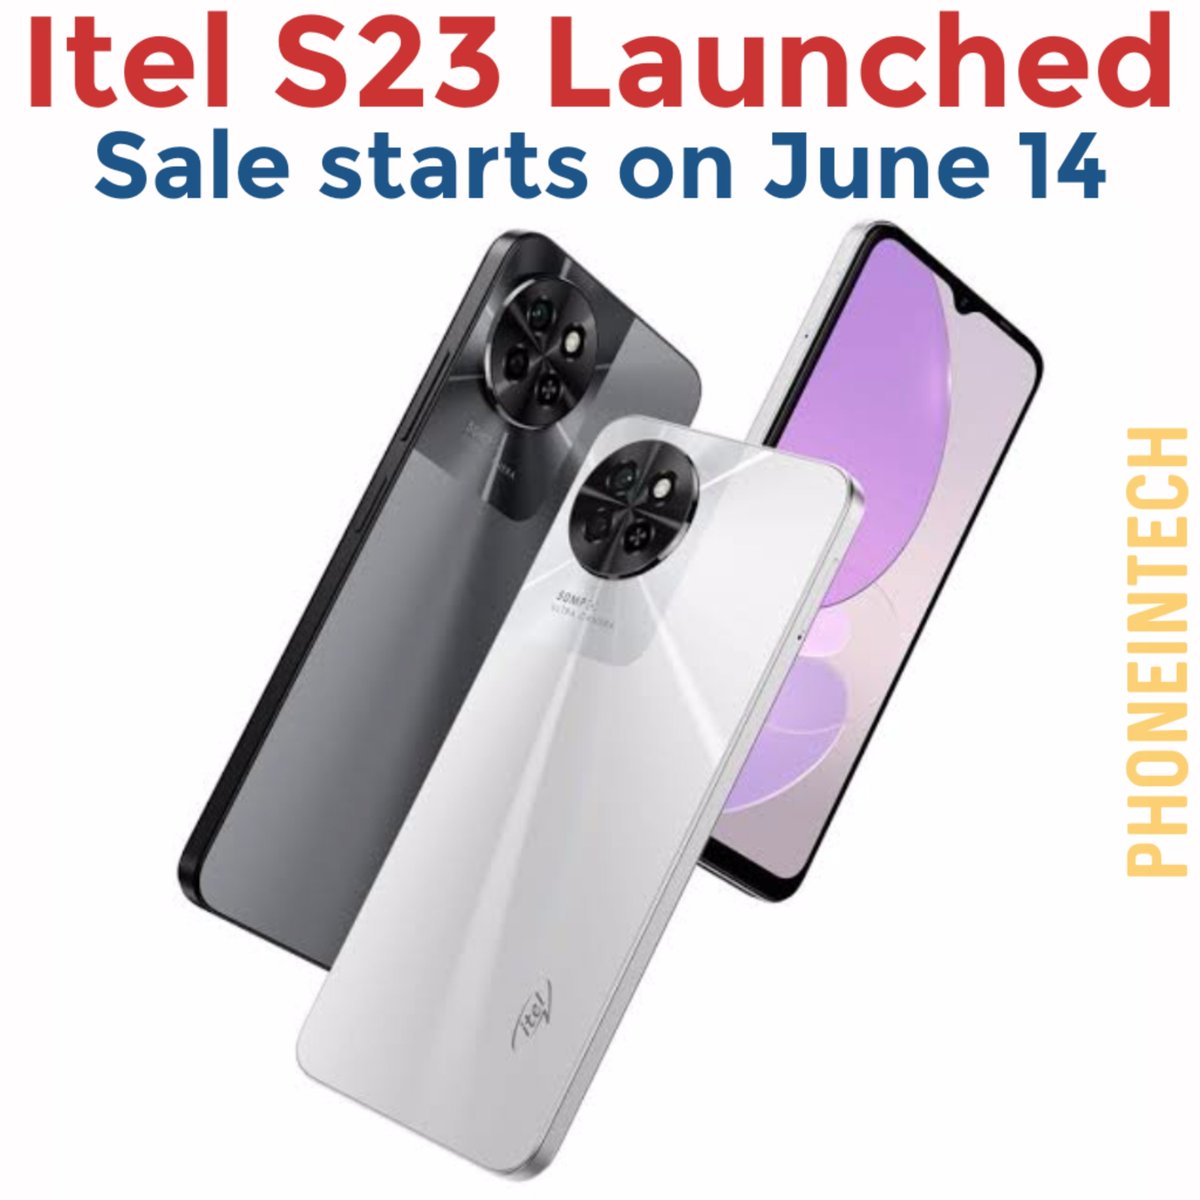 Itel S23 launched in India. It runs on Unisoc T606 SoC and comes with 8GB RAM and 128GB ROM. It is priced at ₹8,799 and the sale starts on June 14 through Amazon. 

#itel #itels23 #itelsmartphones #amazonsale #technews #technewsindia